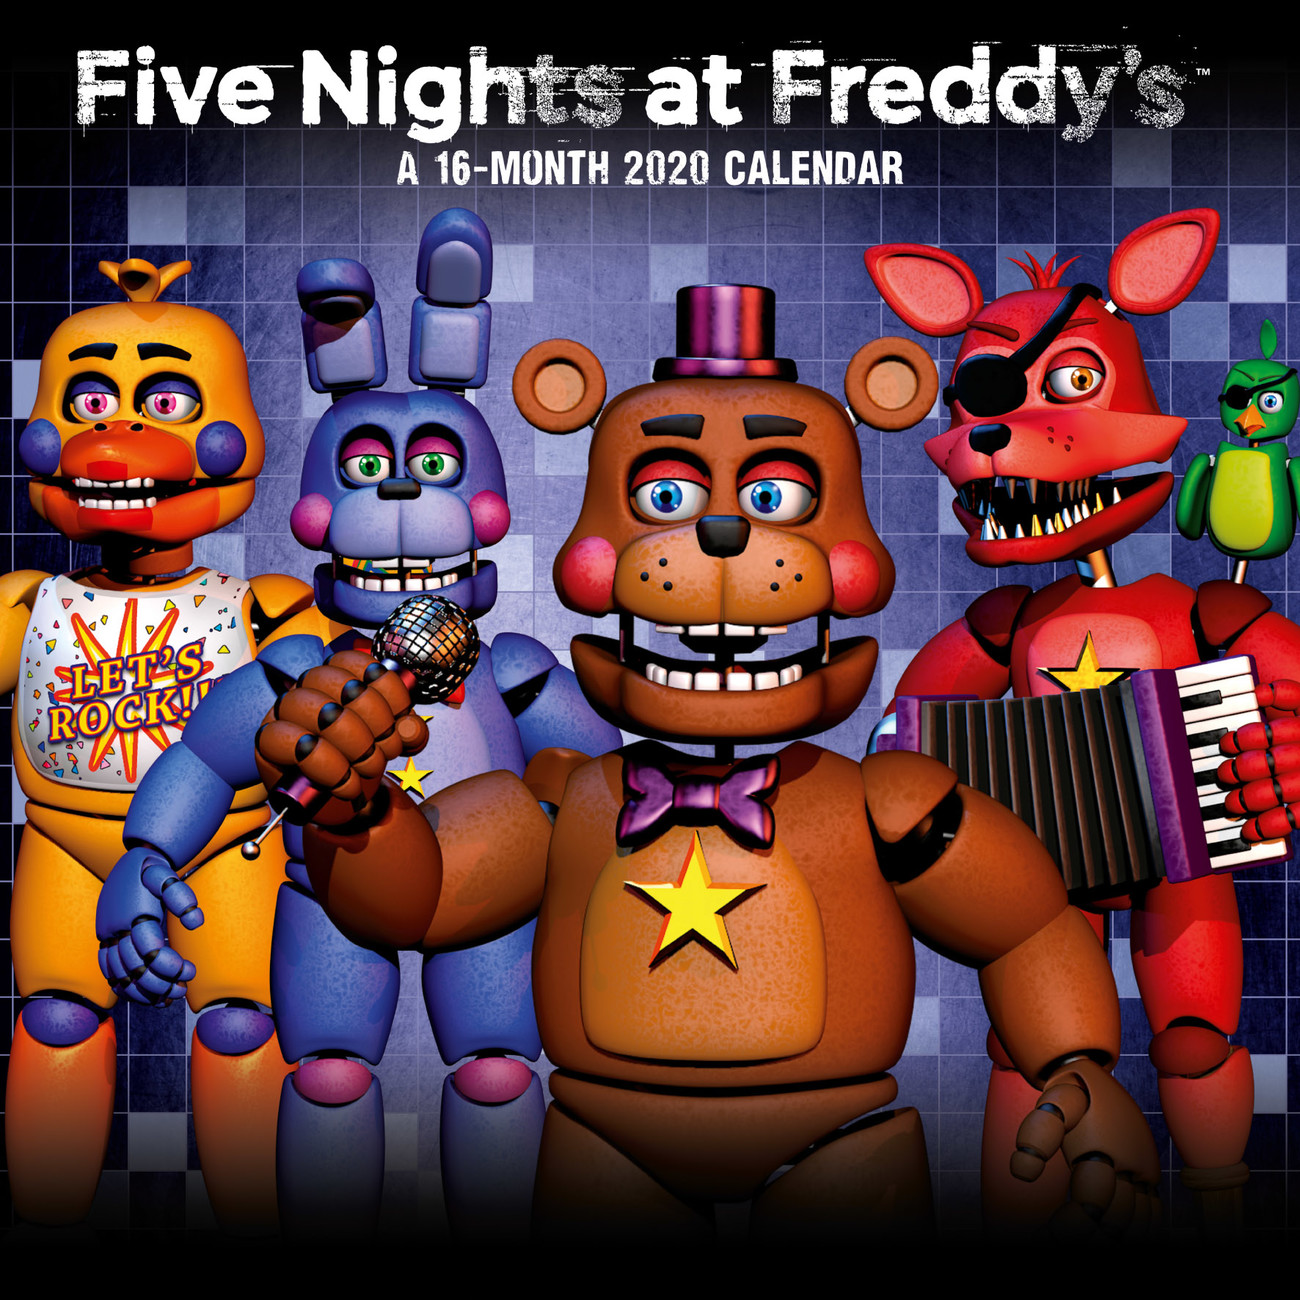 Five Nights At Freddys Calendars 2021 on UKposters/EuroPosters